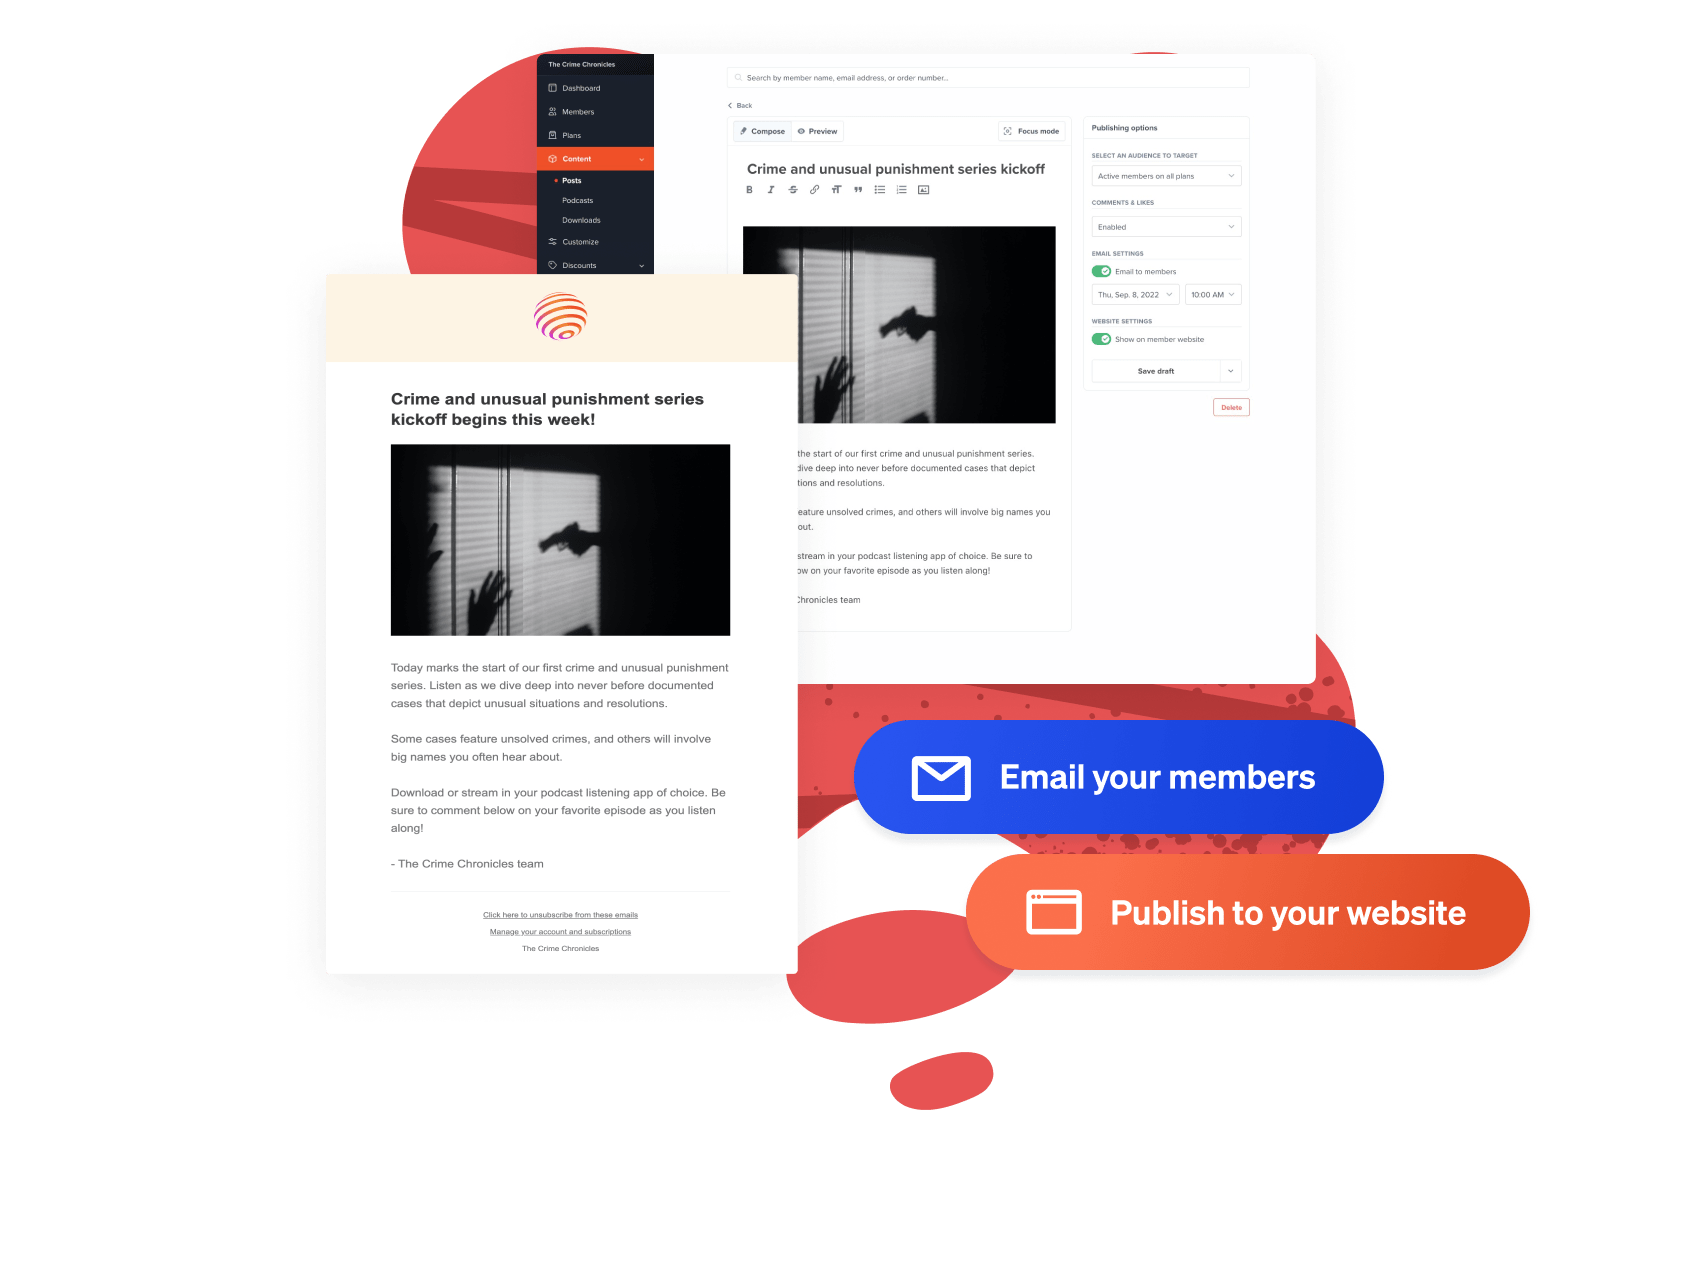 Memberful hosted newsletter tools